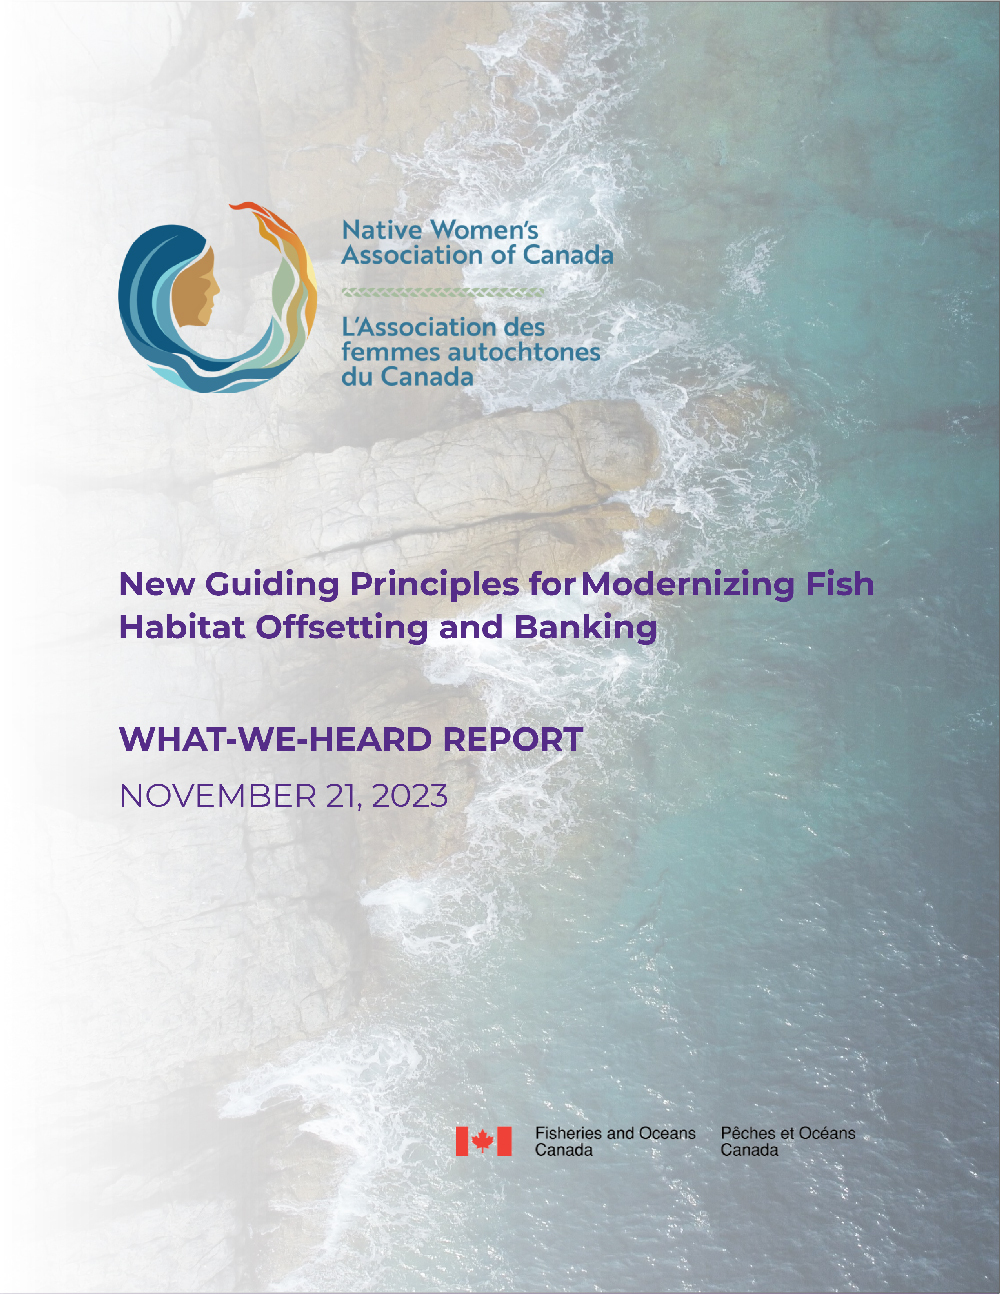 New Guiding Principles for Modernizing Fish Habitat Offsetting and Banking